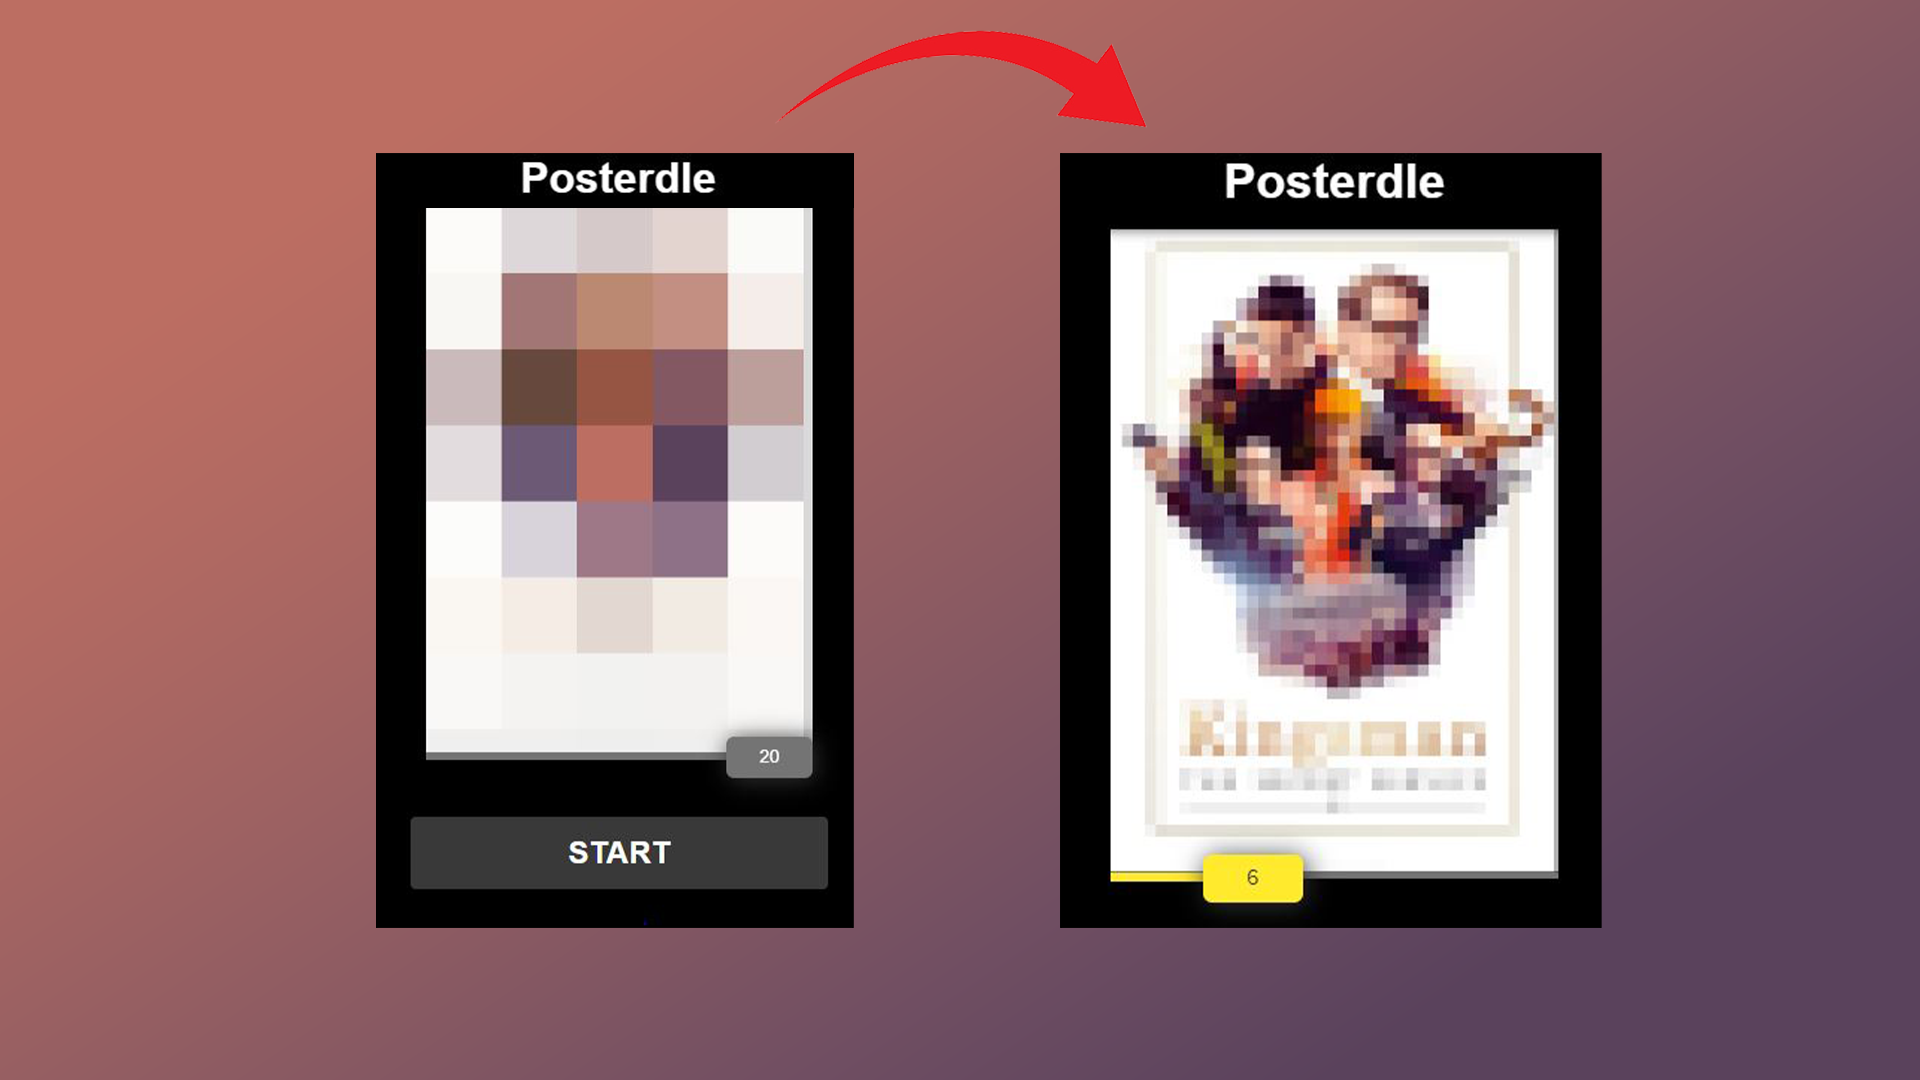 The posterdle Review: A Review of Iconic Brands